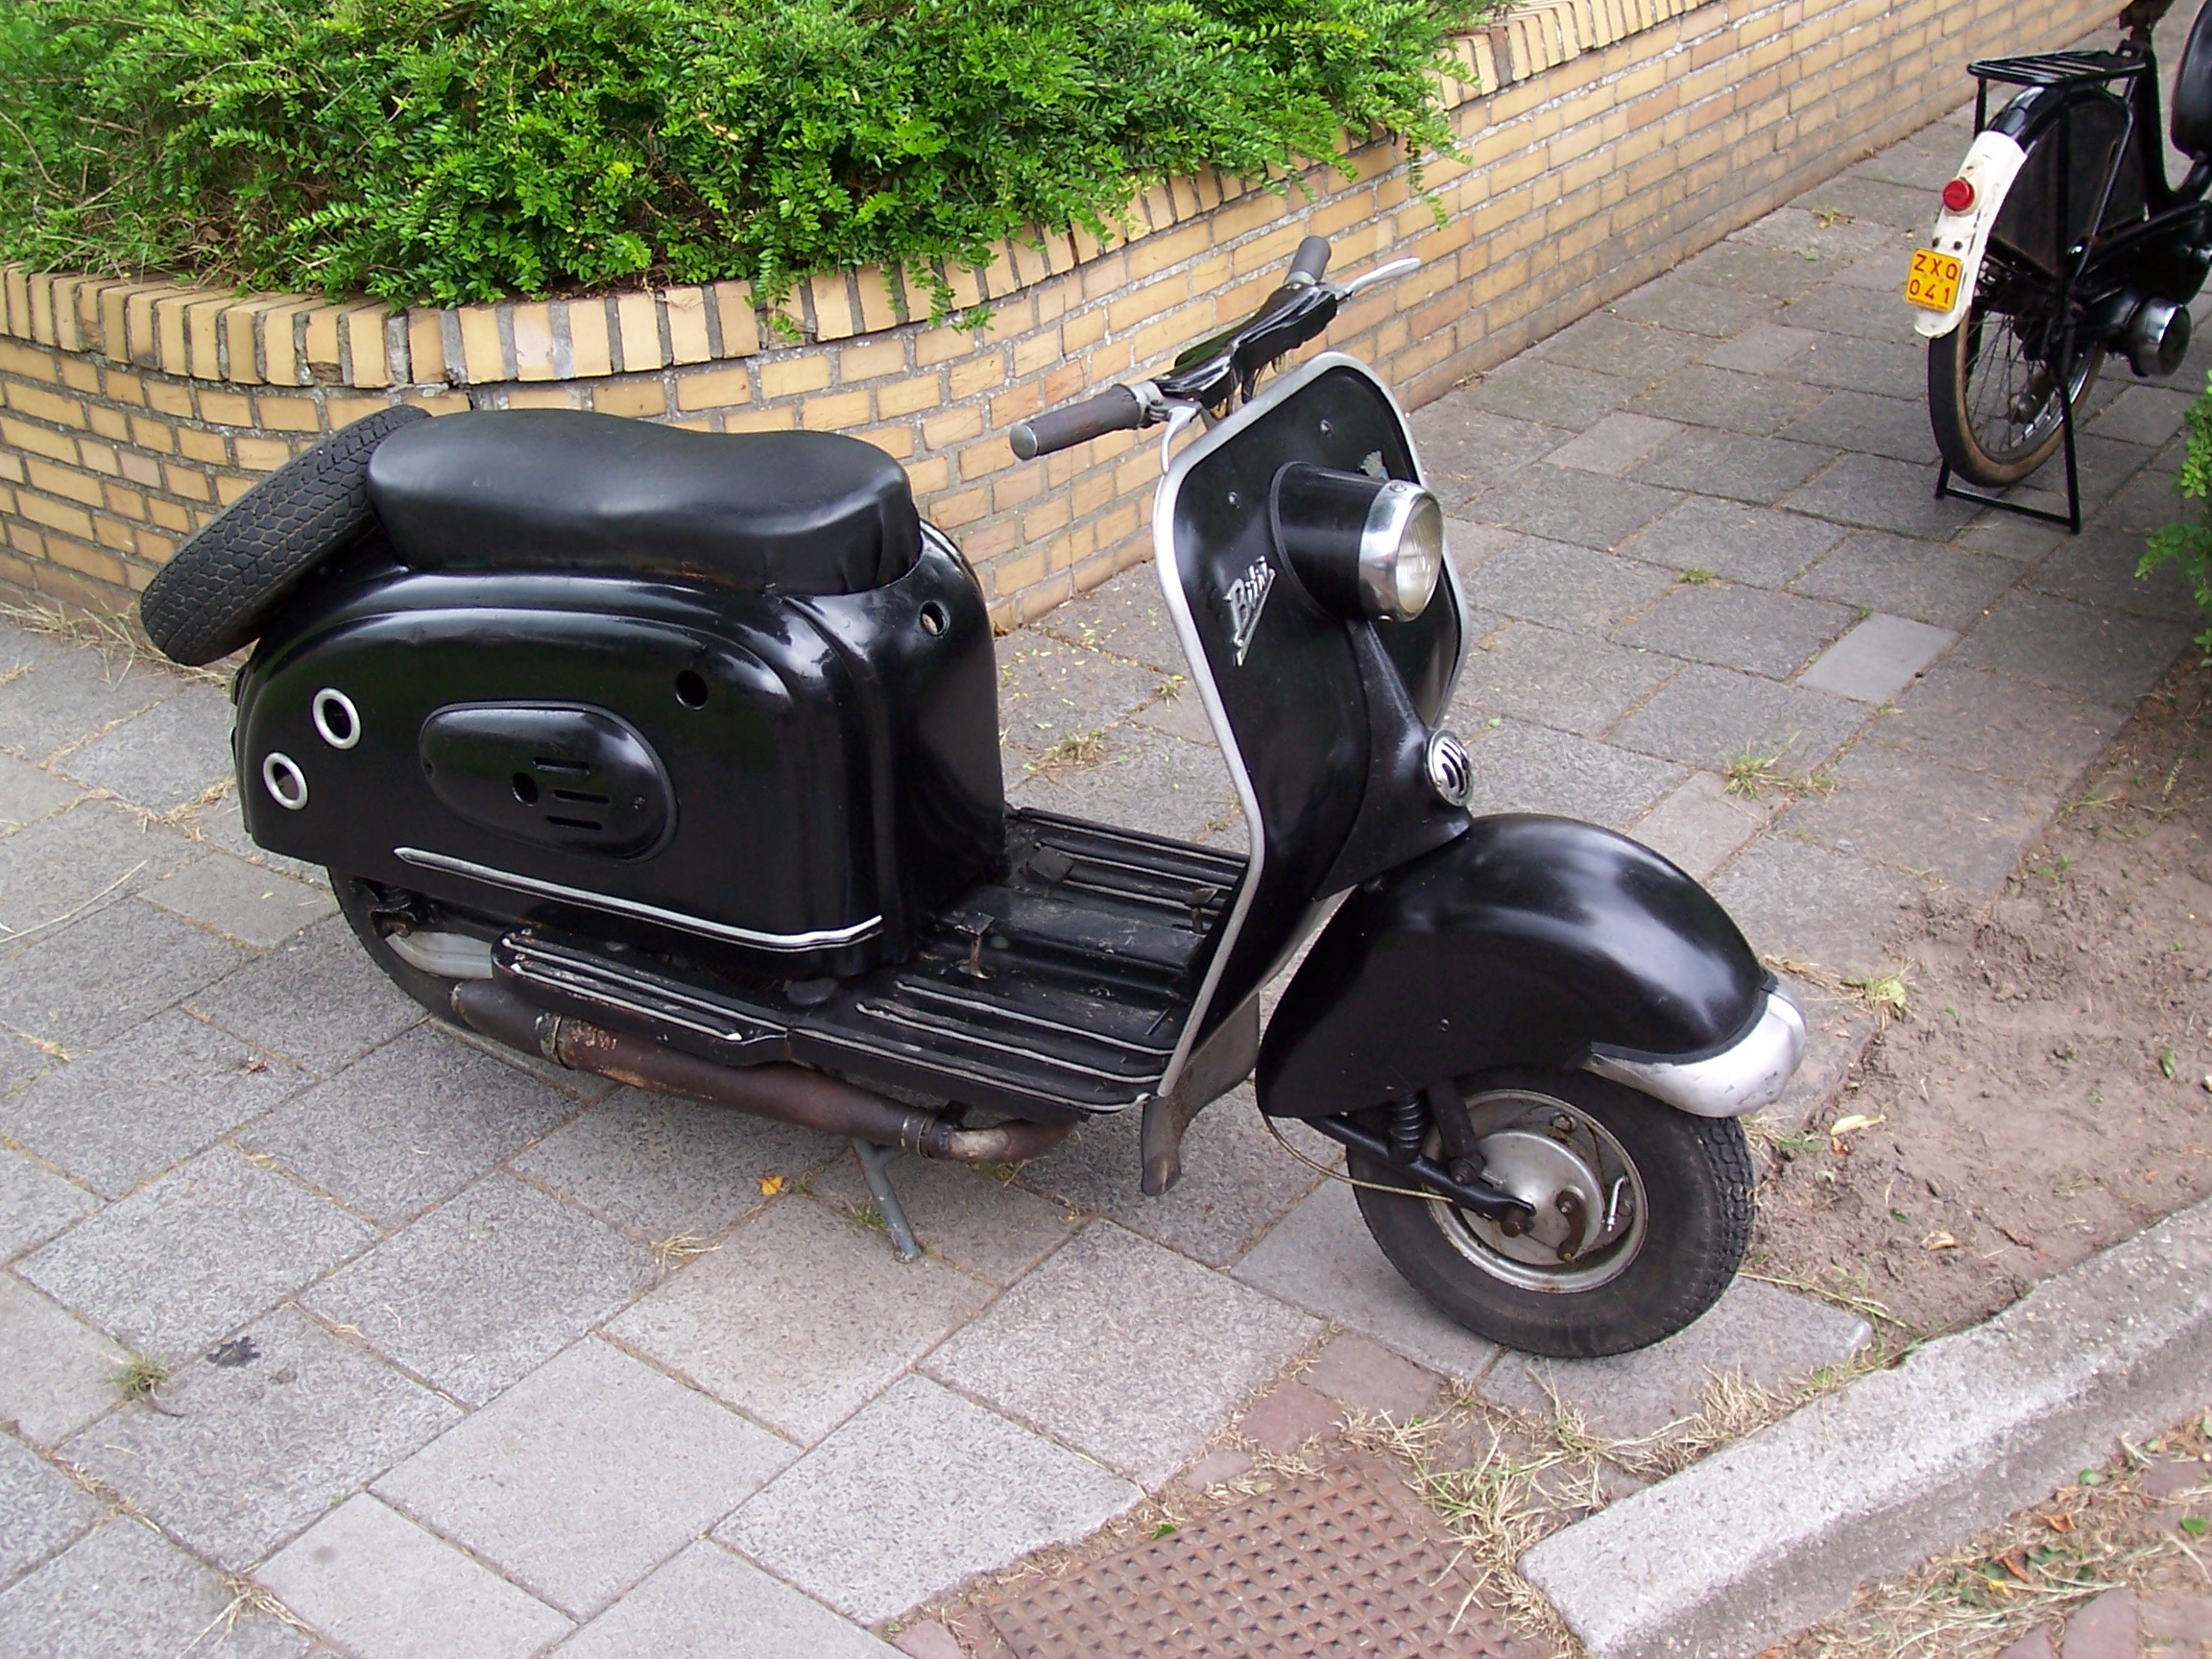 hjemme revolution flaske Scooter - Simple English Wikipedia, the free encyclopedia